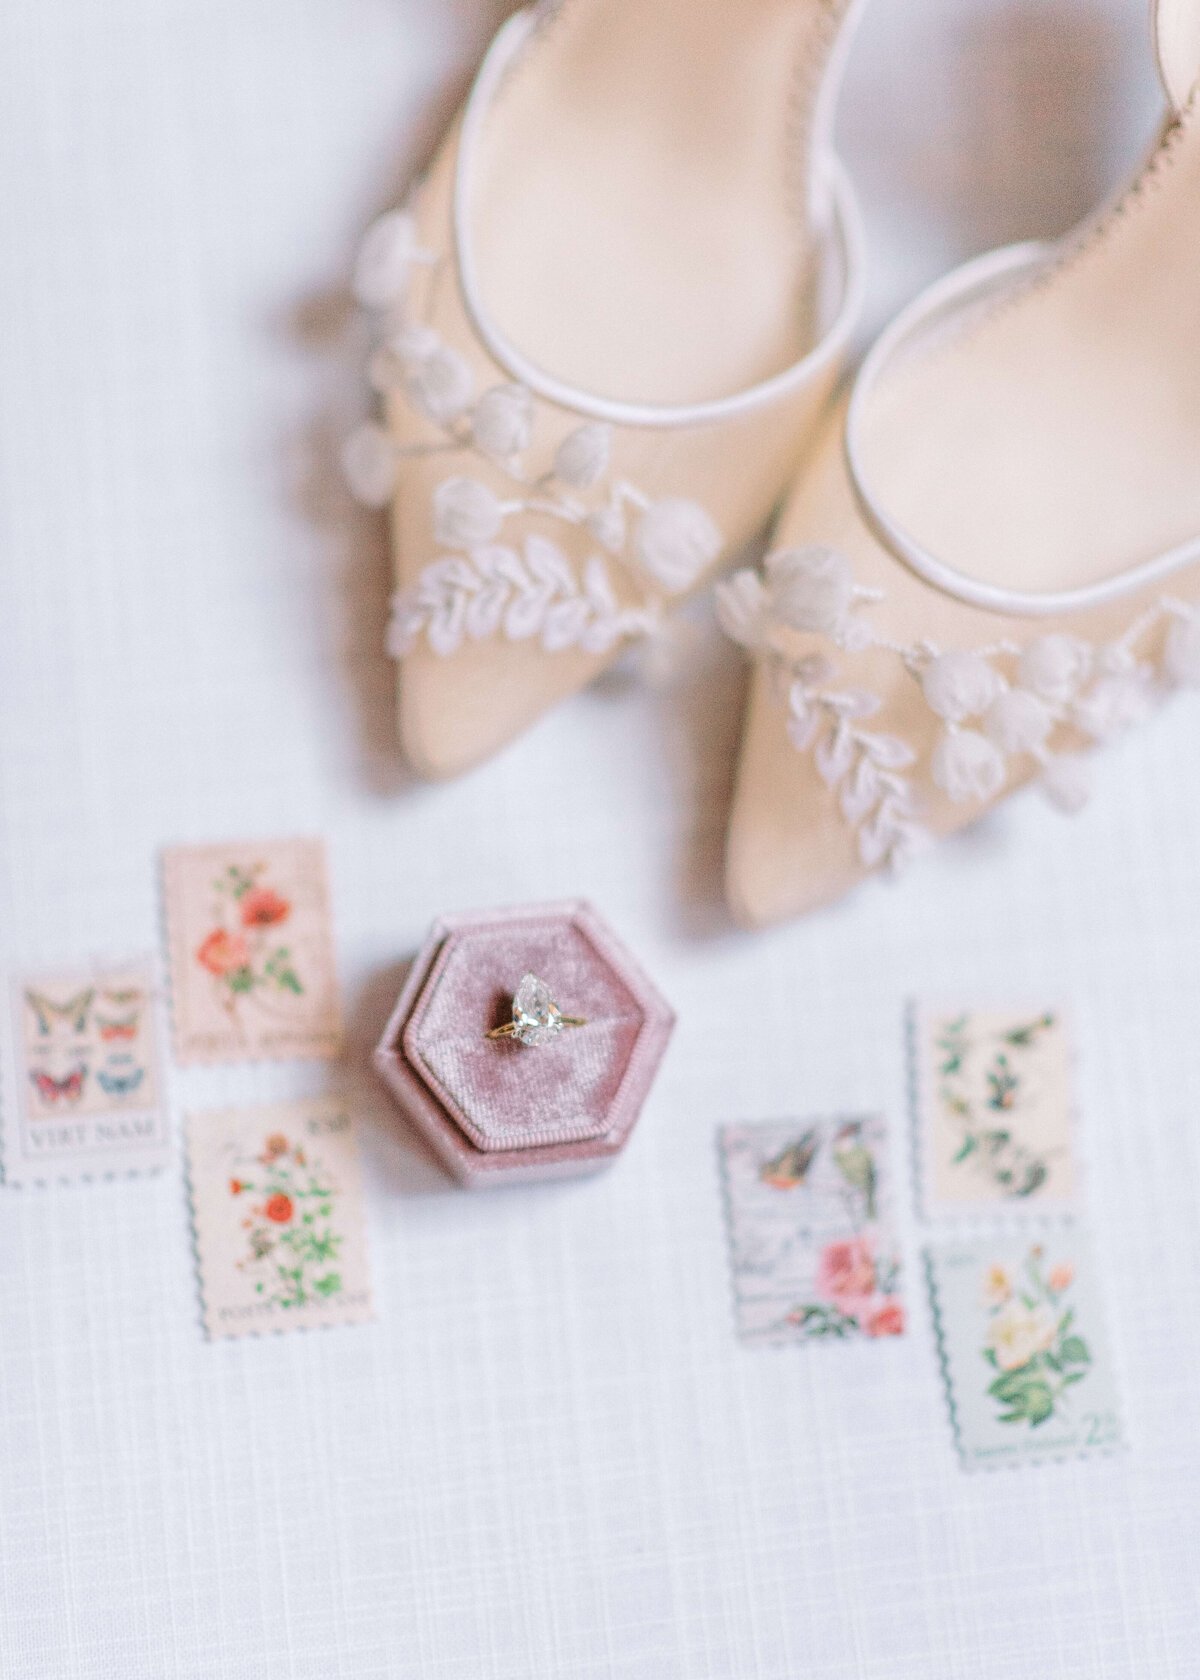 Beautiful engagement ring and floral lace wedding shoes  arranged for detail photos taken by Virginia Wedding Photographer Erin Winter